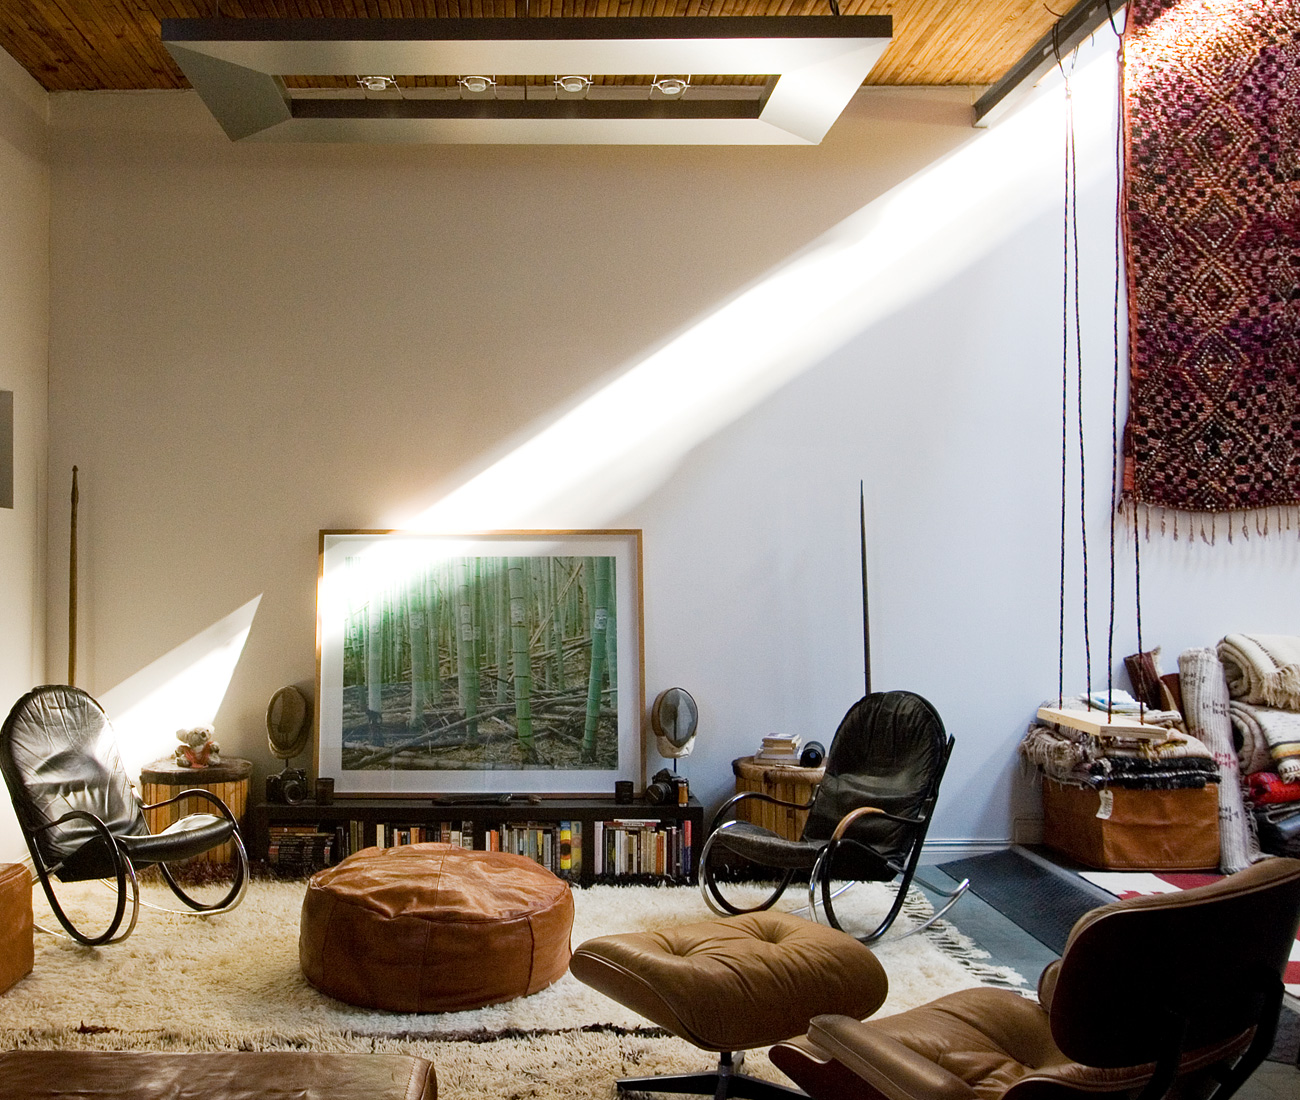 Living room with furnishing and rugs